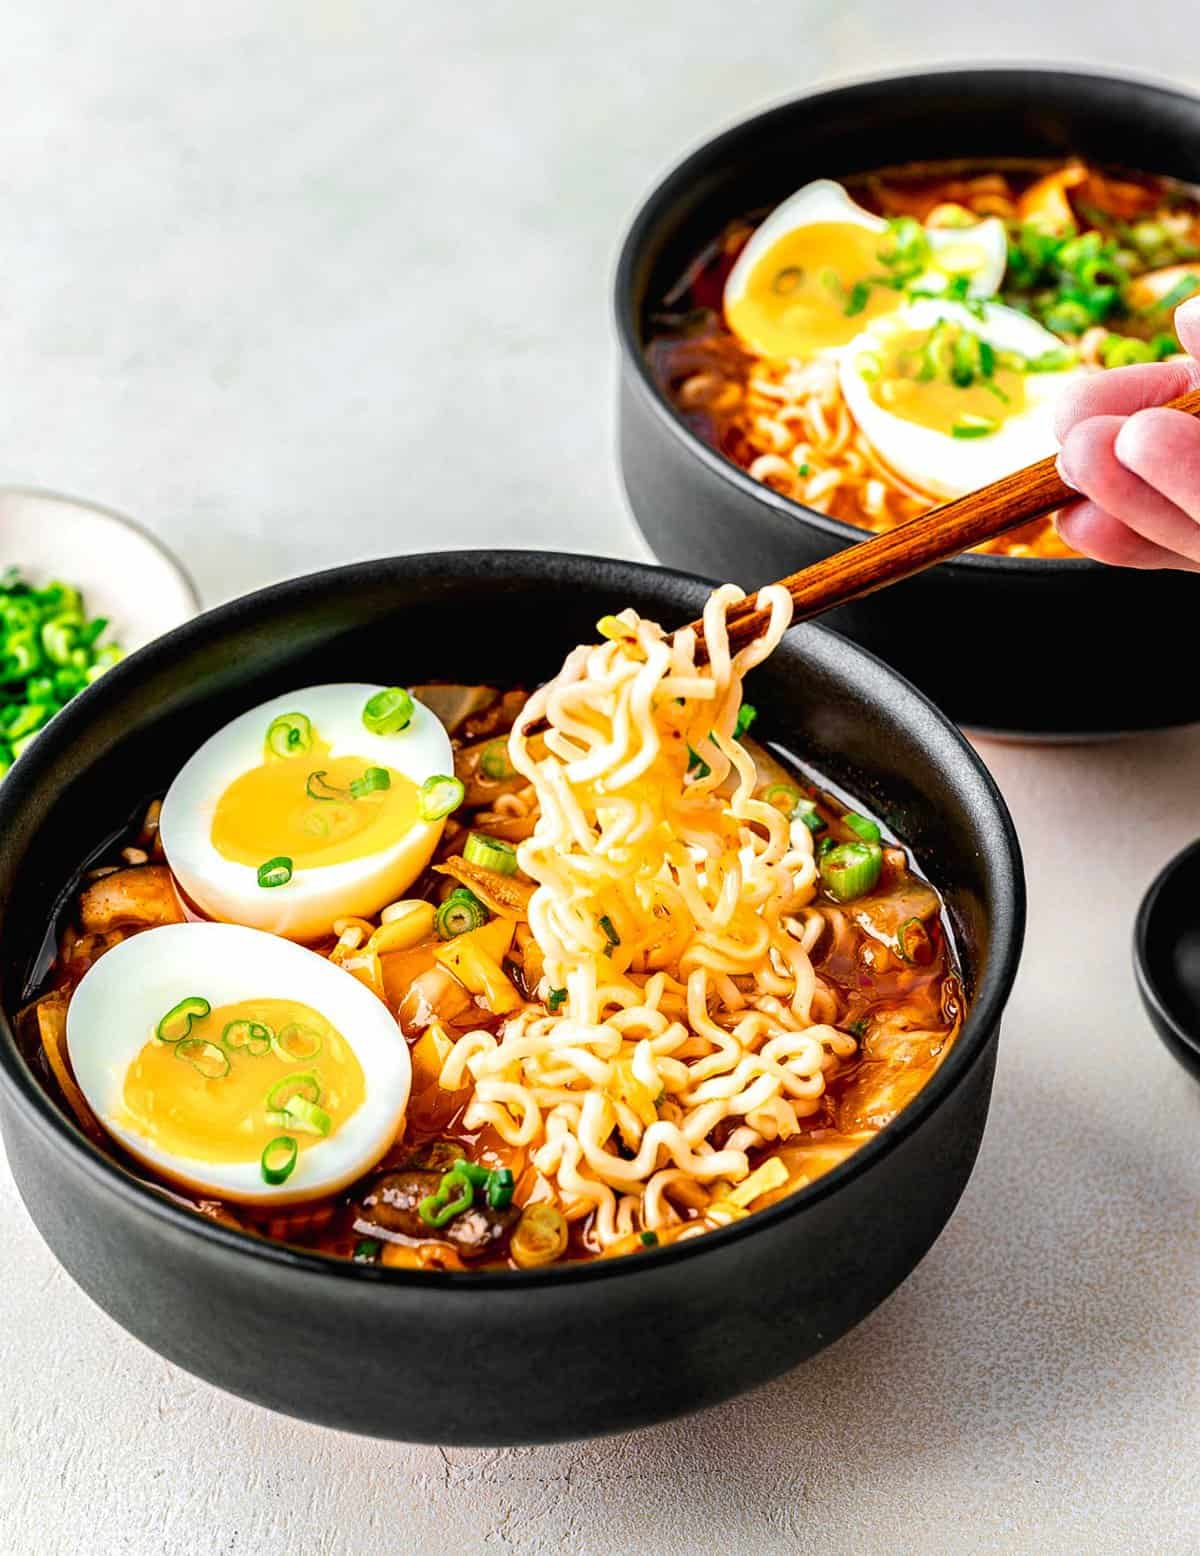 Kimchi ramen served in 2 bowls. A hand with chopsticks is taking a bite out of one of the bowls.